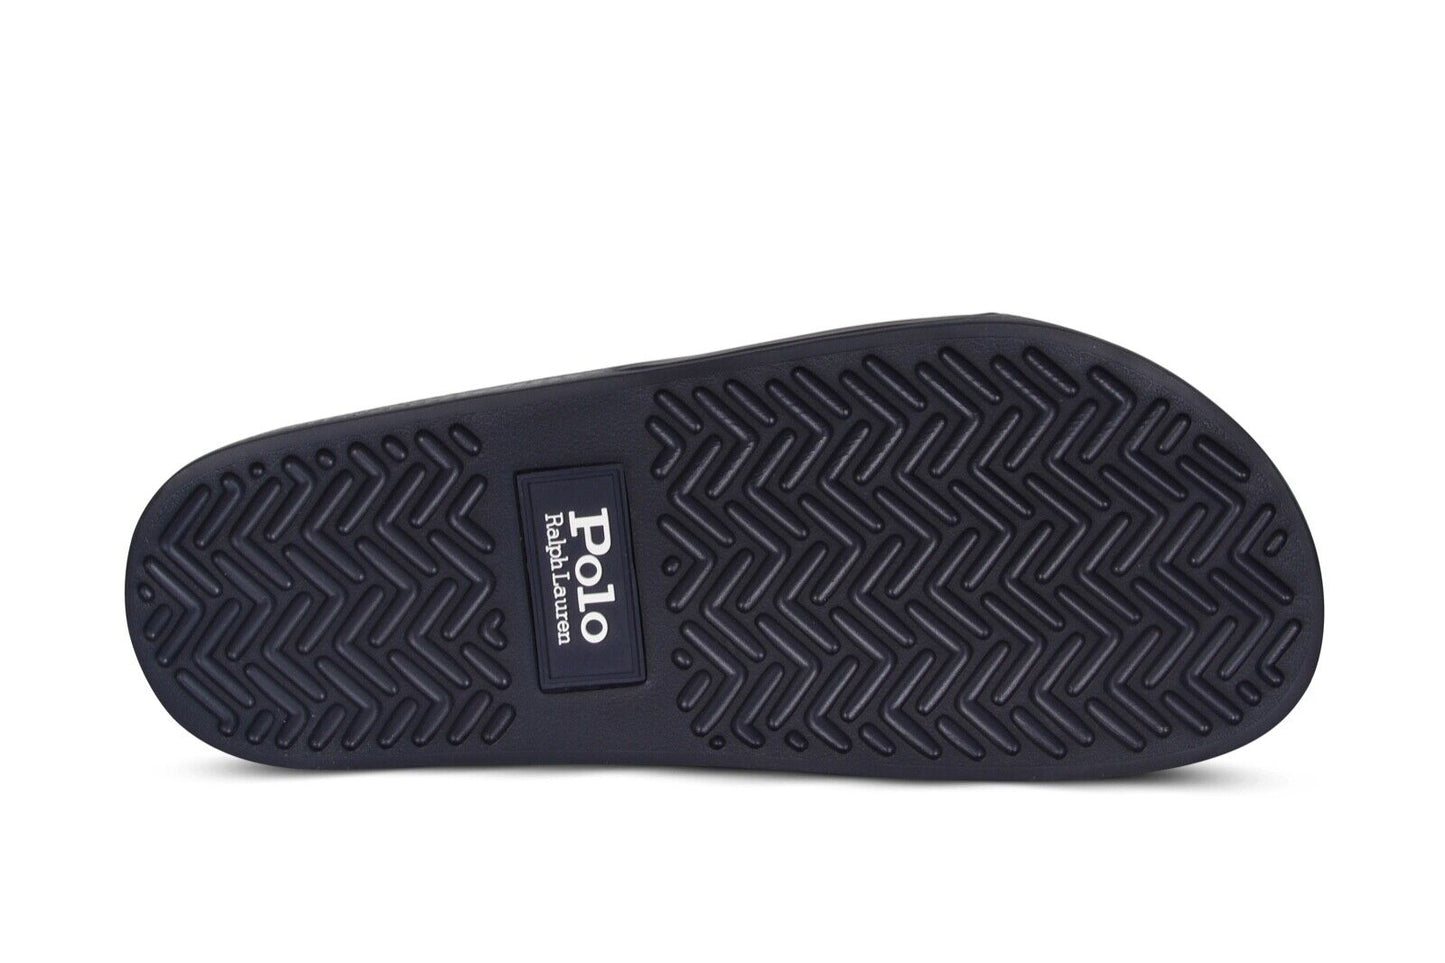 Polo Ralph Lauren Signature Pony Slide in Navy Blue and White 809852071010